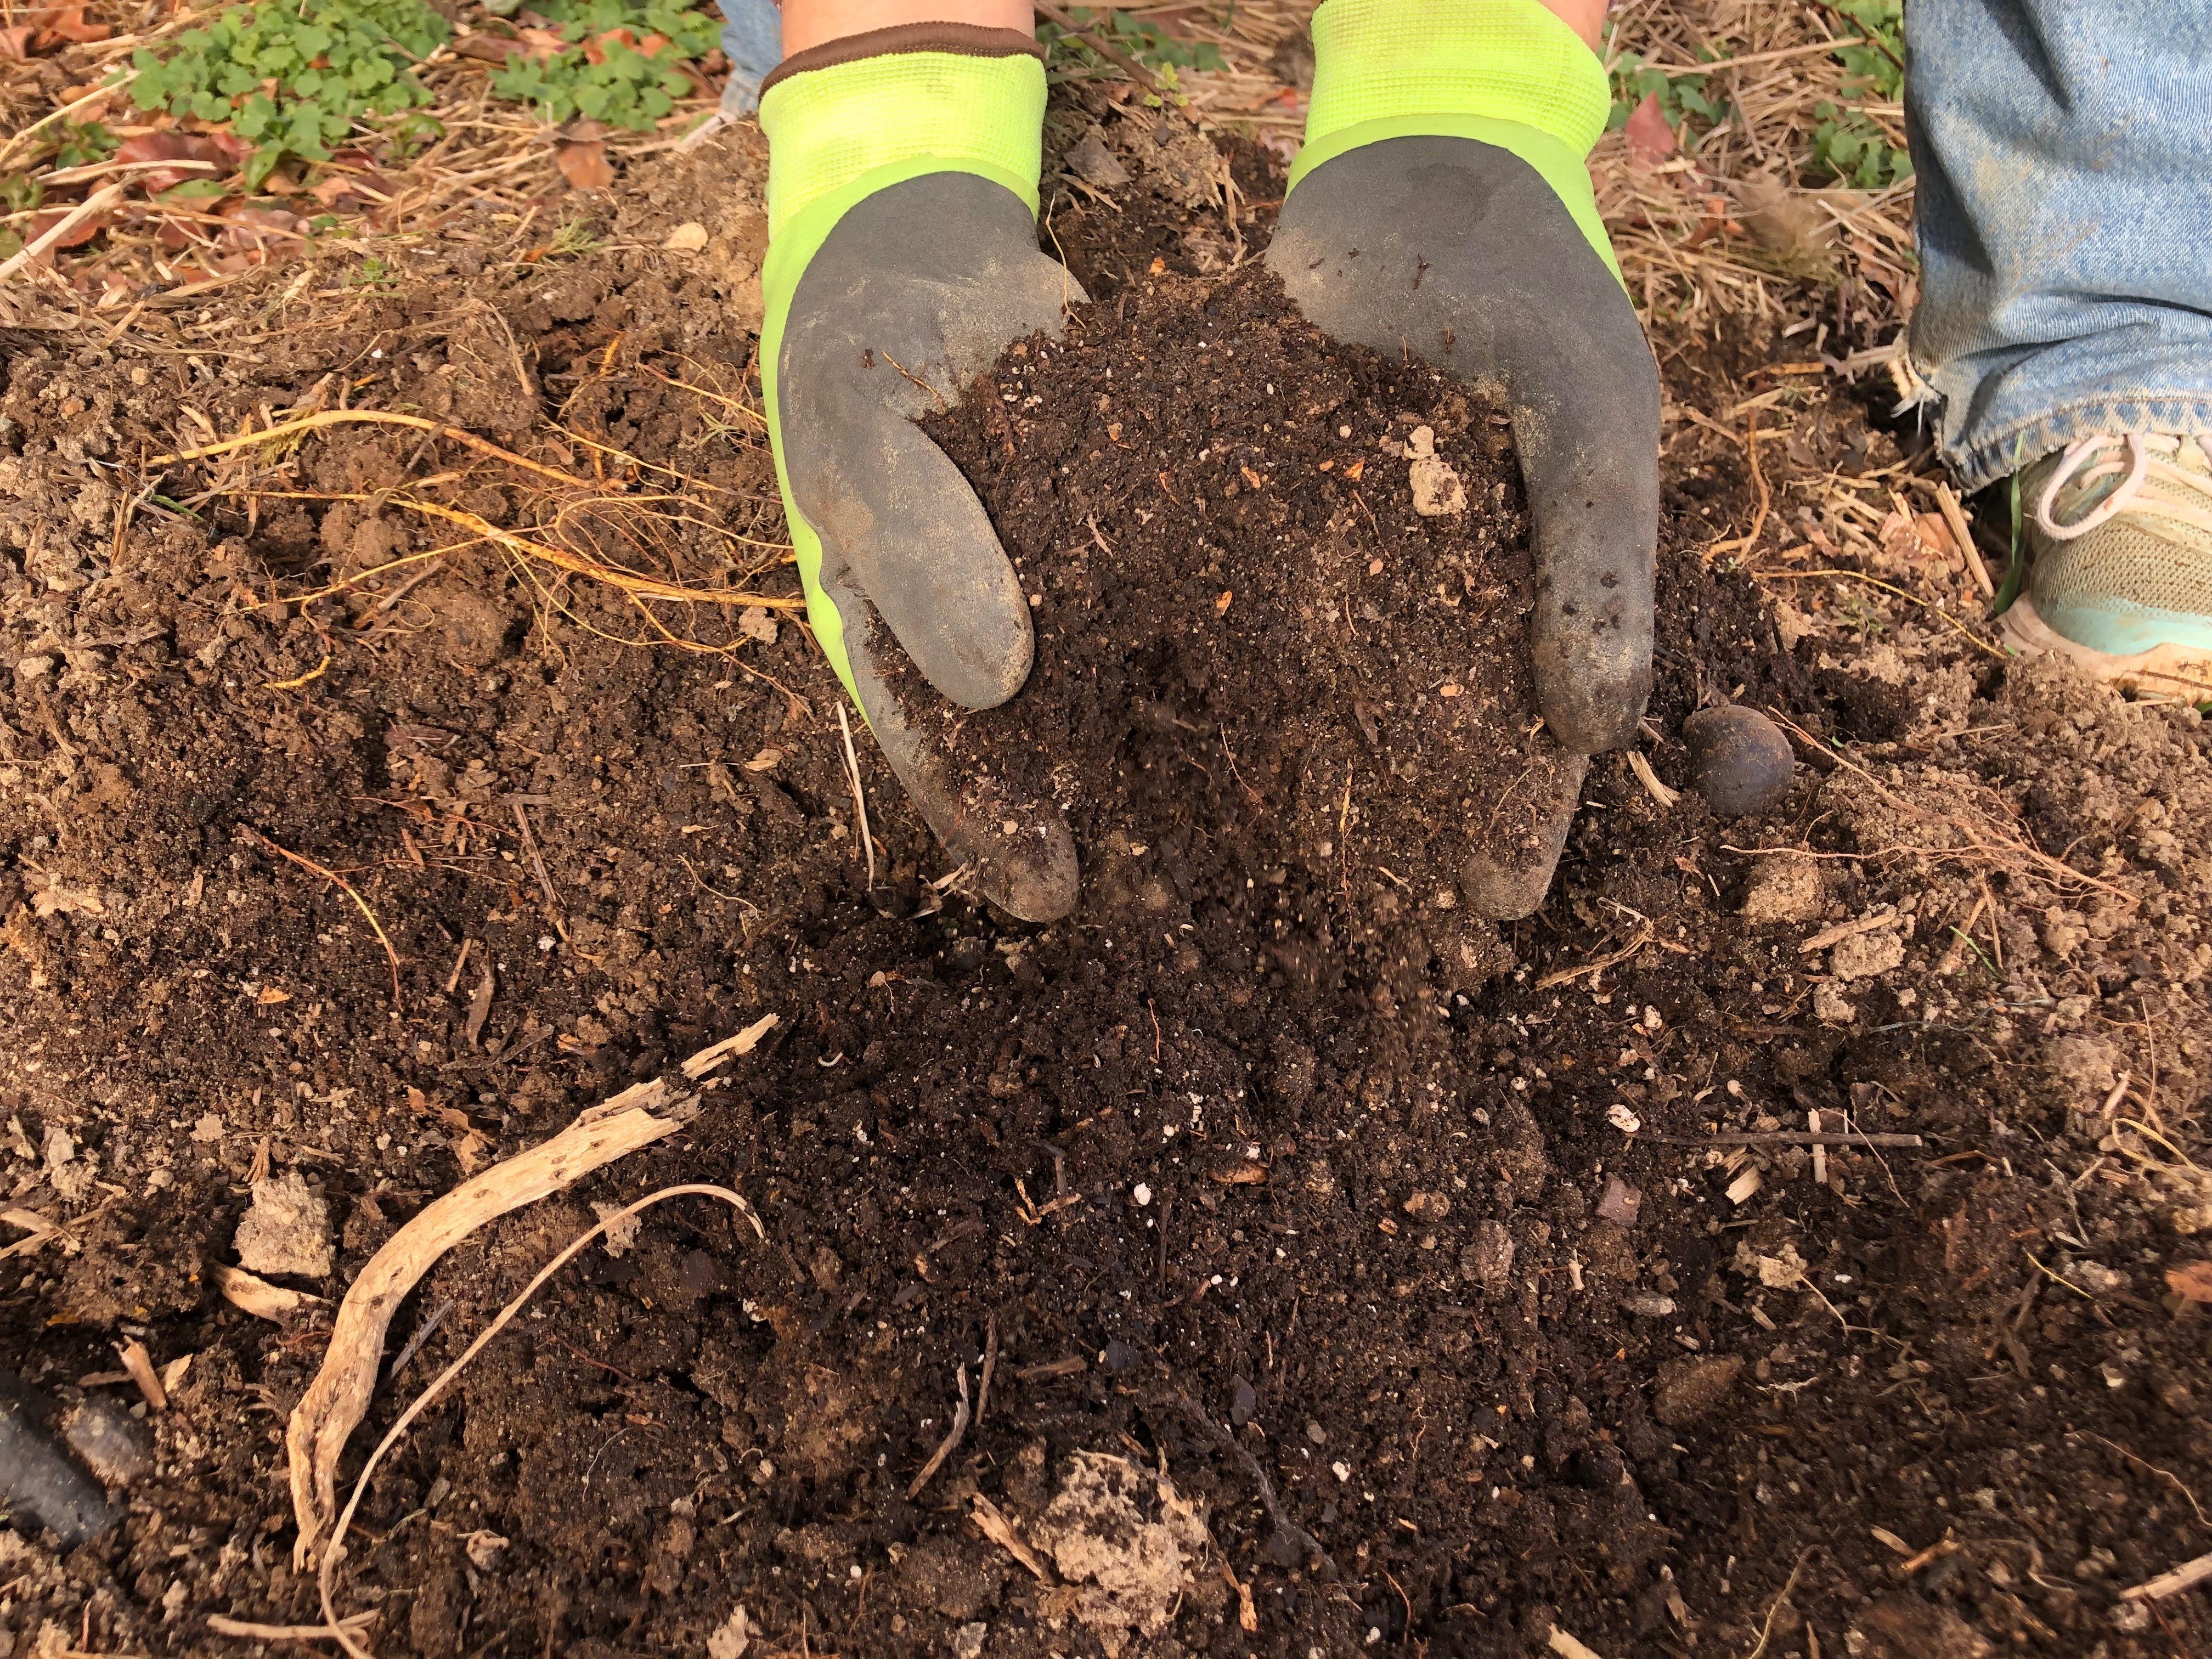 A person digging through the nutrient rich soil made by the compost